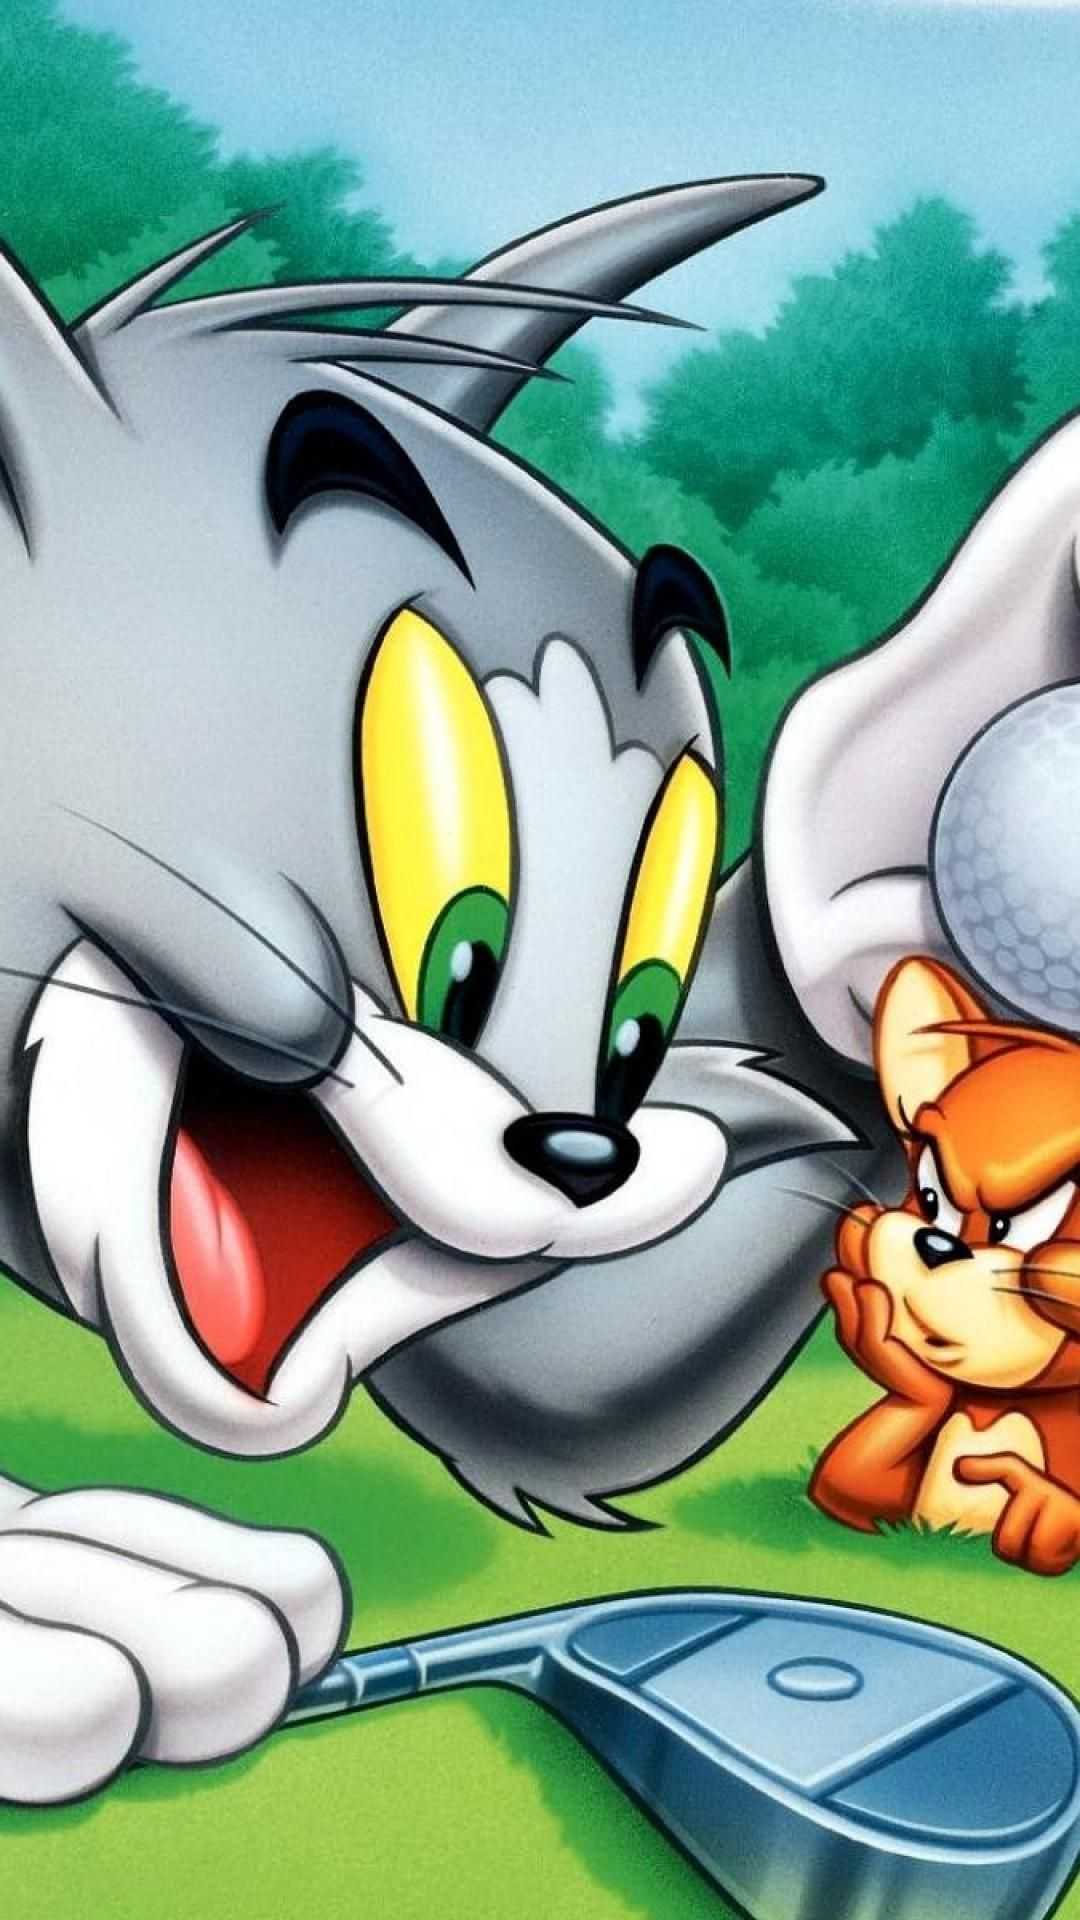 Wallpapers Collection Tom and Jerry Wallpapers